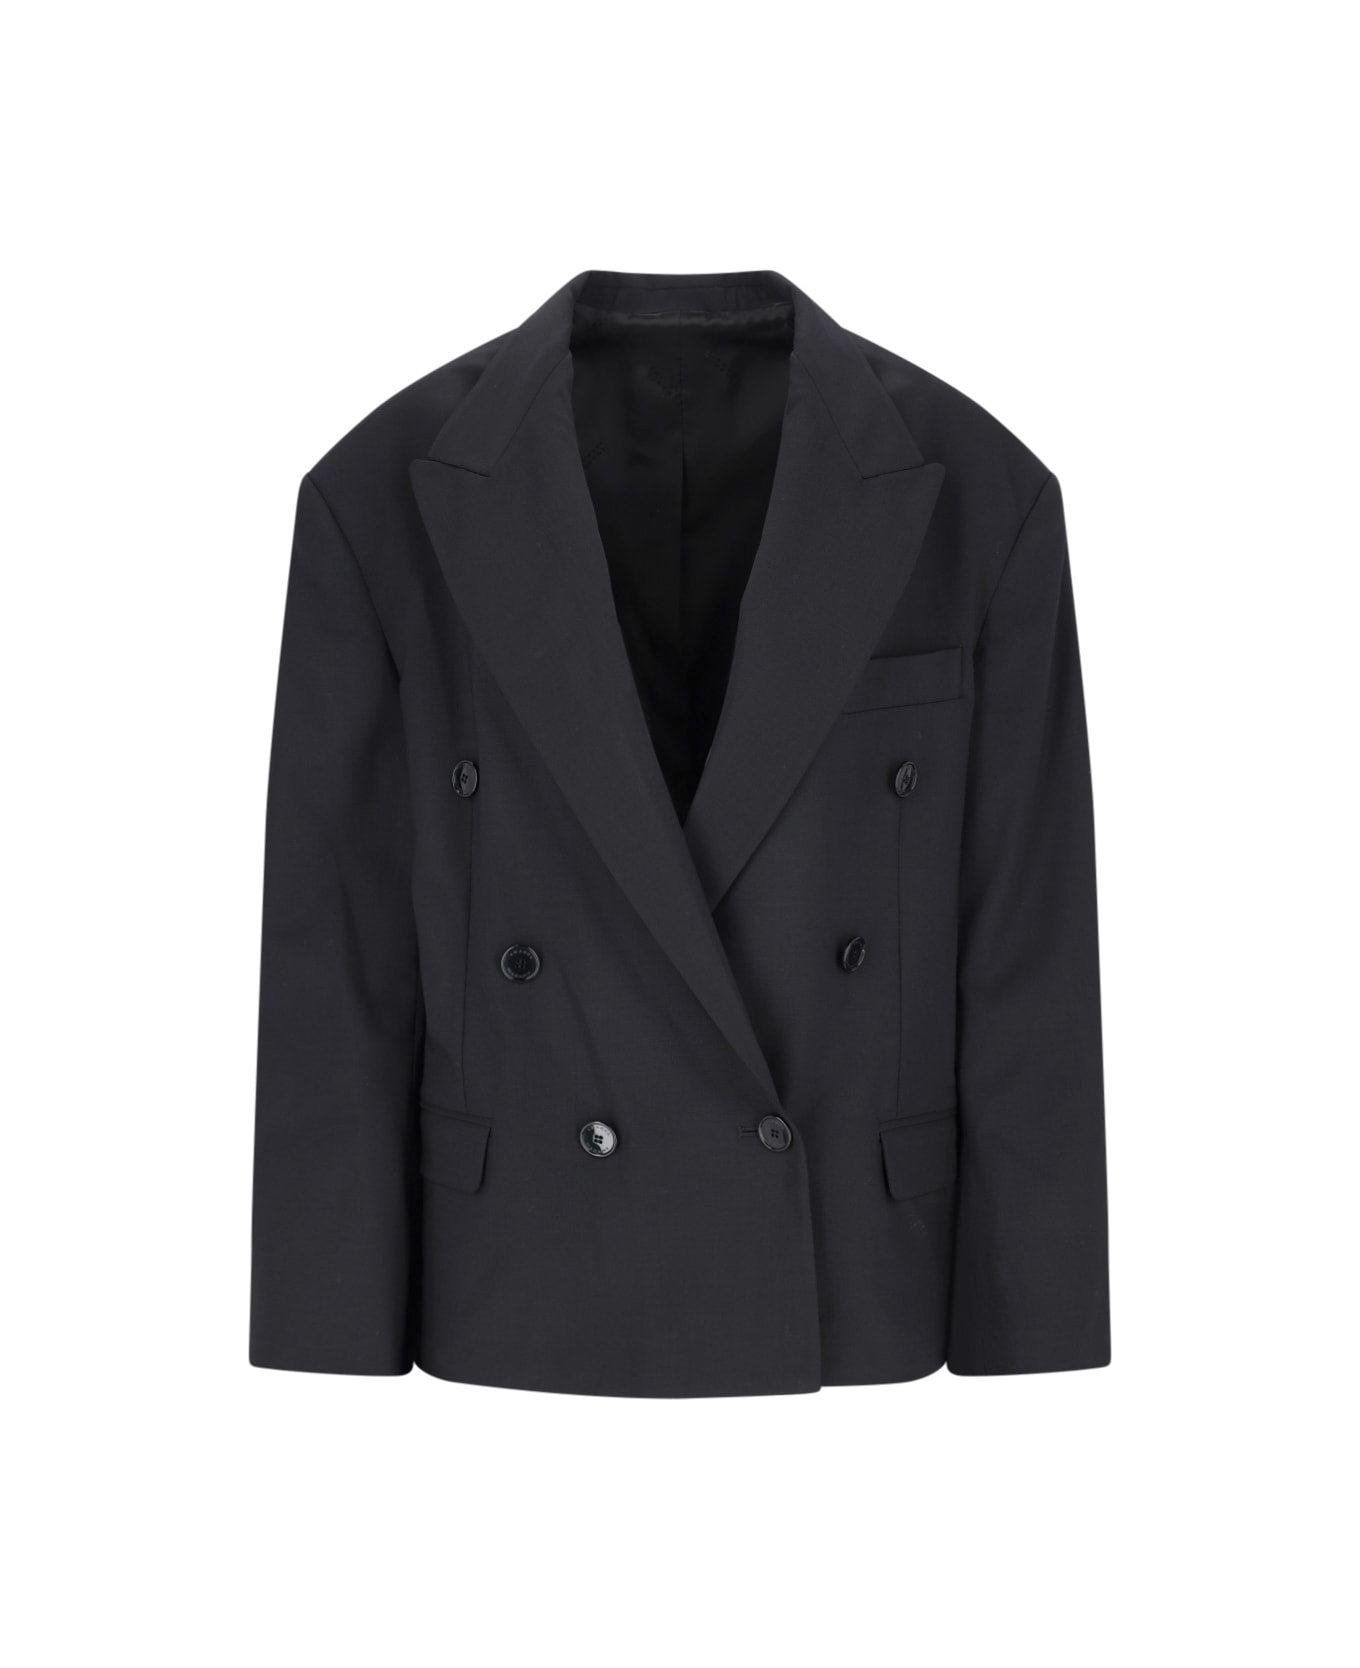 Isabel Marant Double-breasted Tailored Blazer - Black